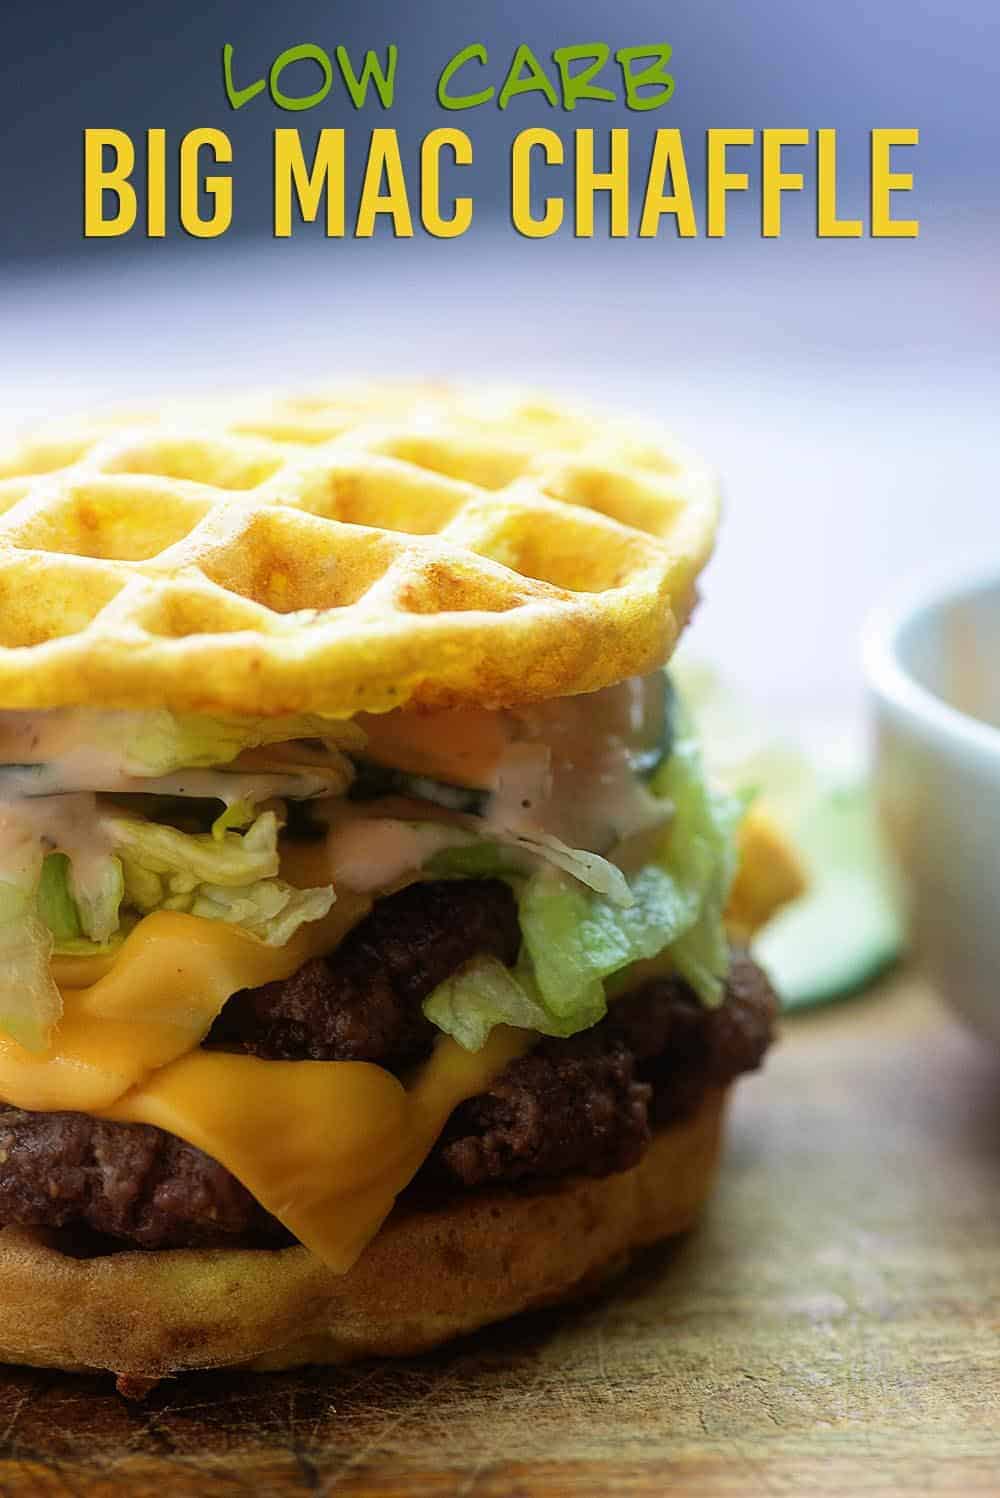 chaffle used as bread making a cheeseburger